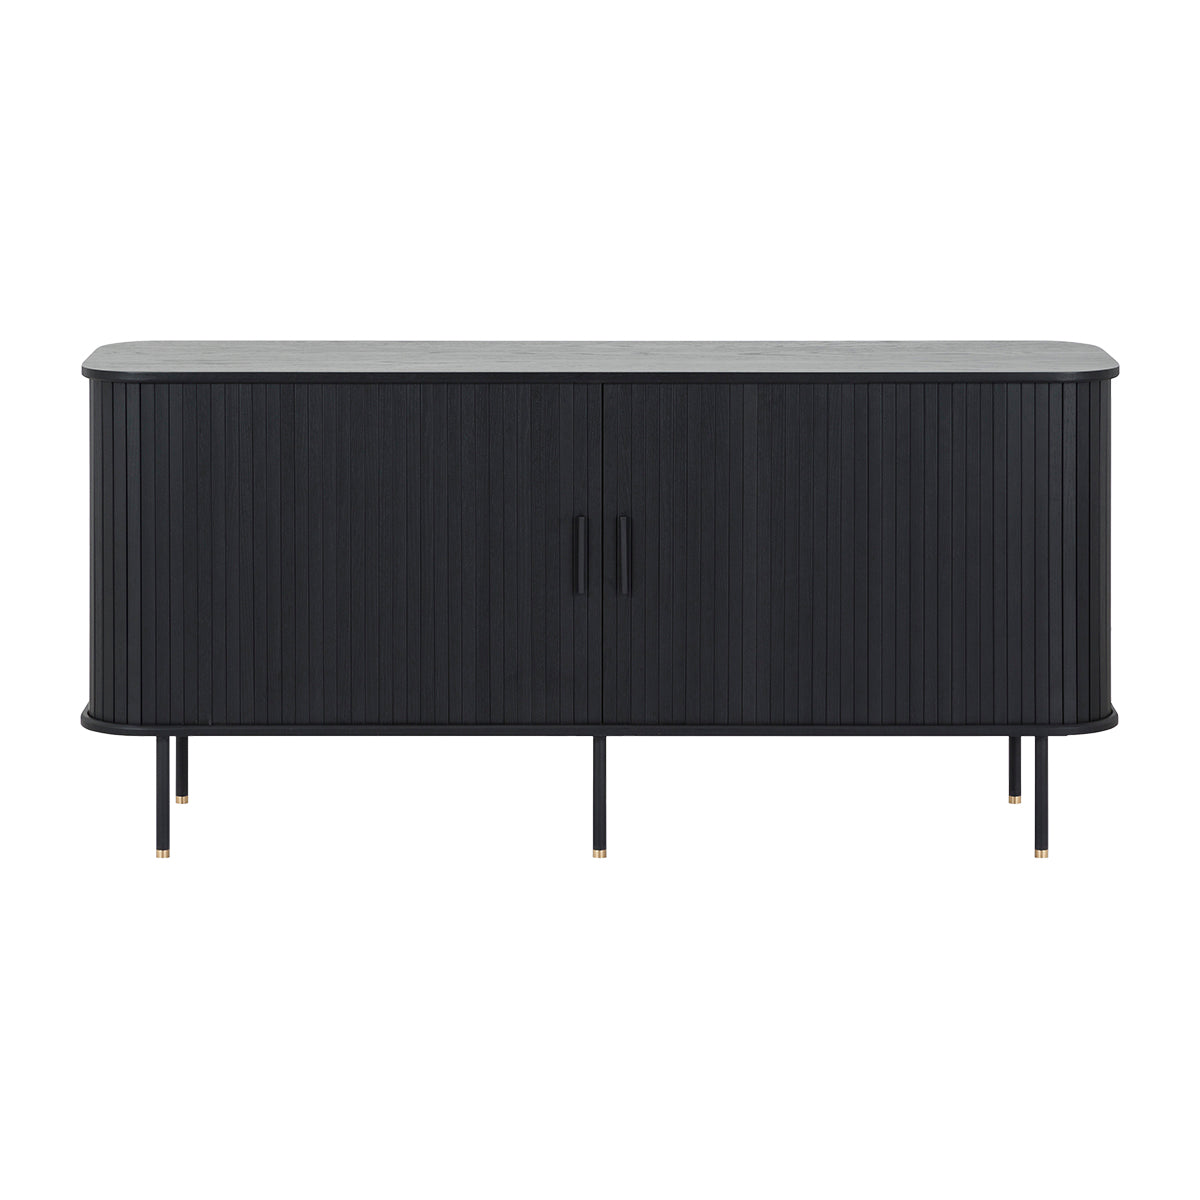 Life Interiors - Shop Ipanema Sideboard & Furniture Online or In Store!